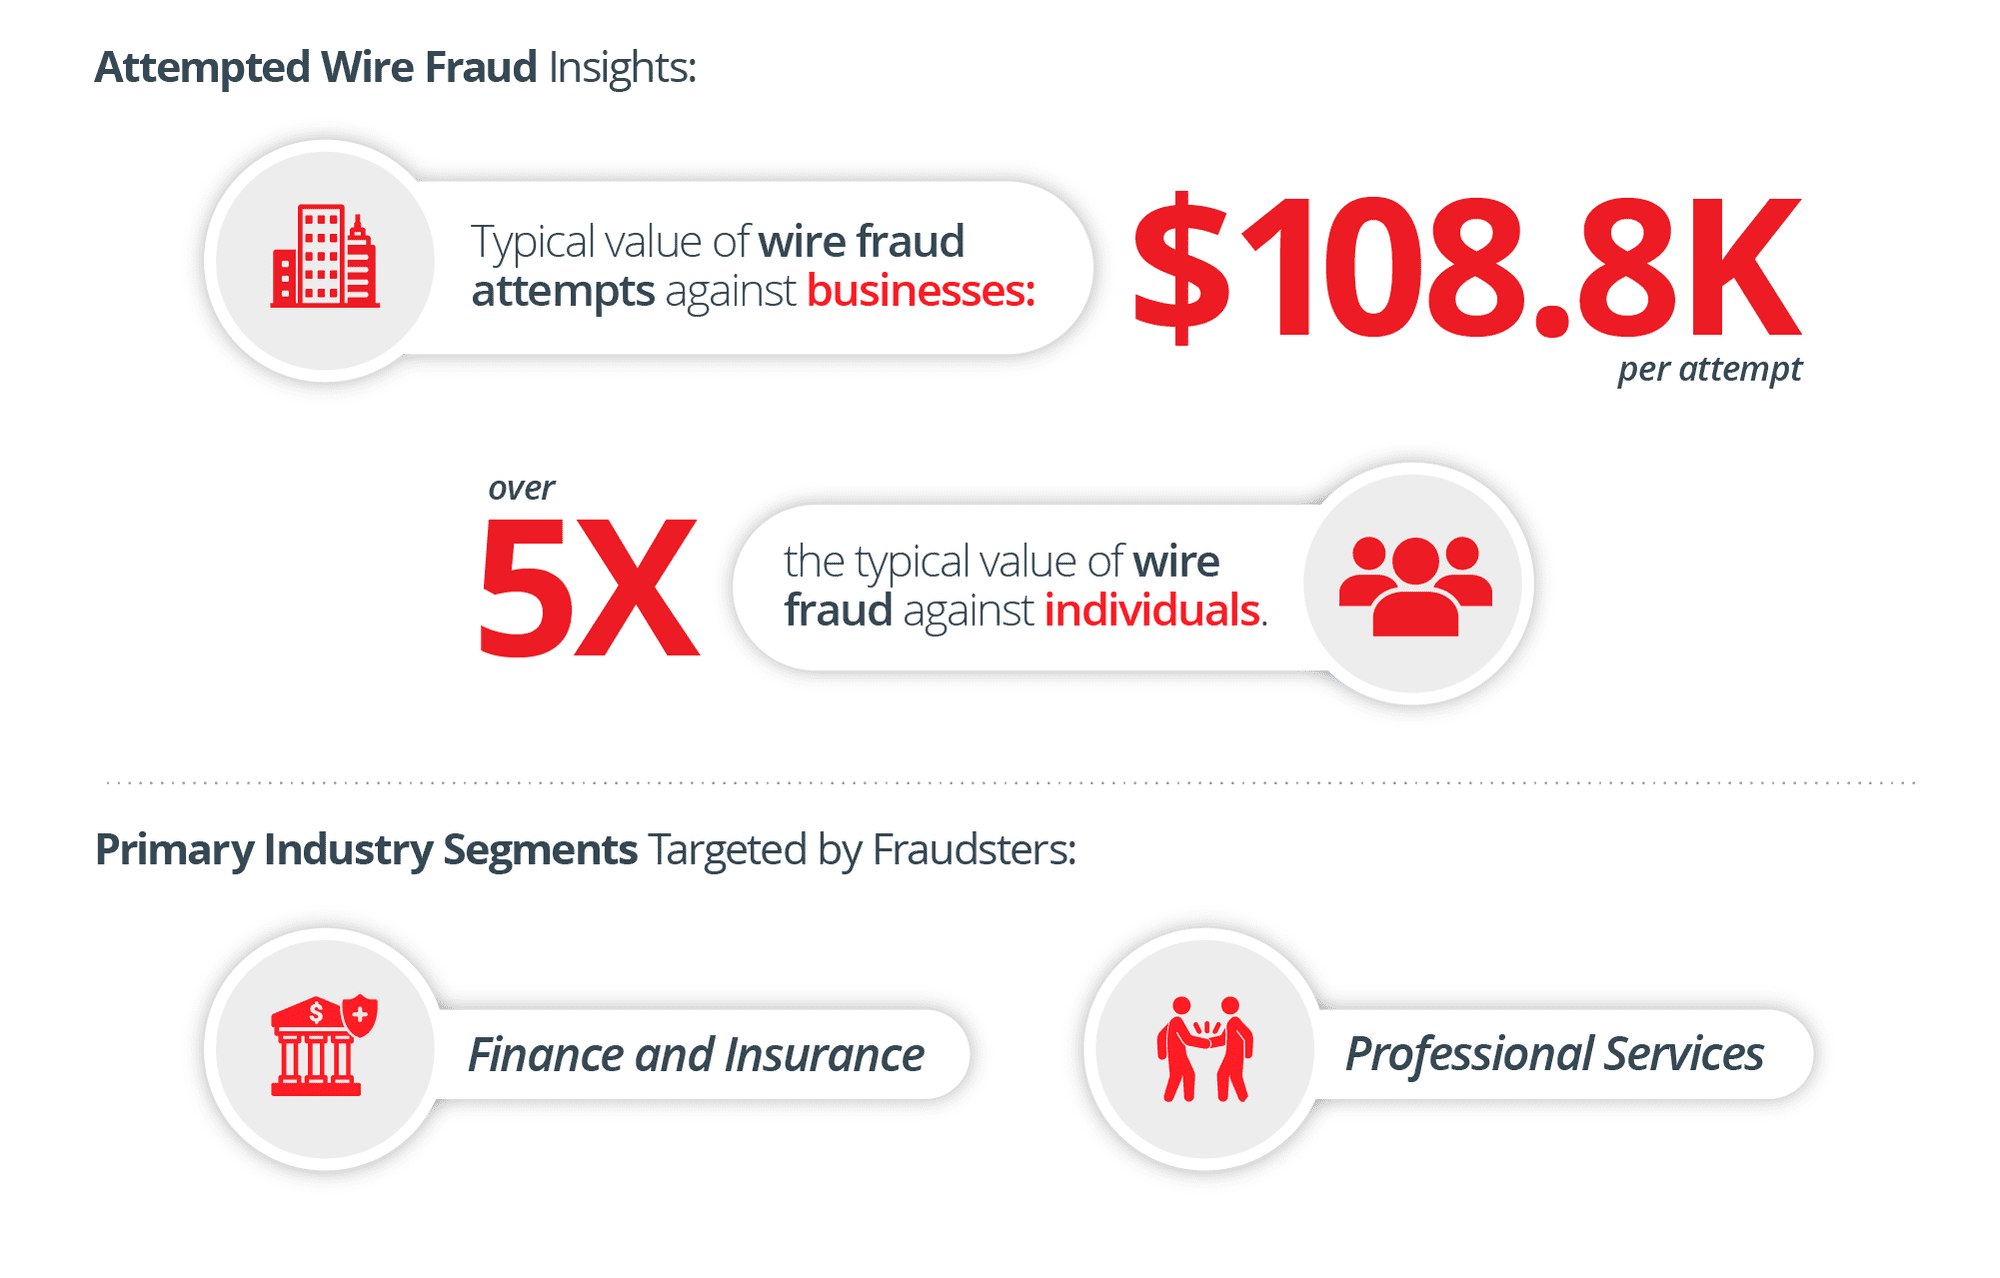 Attempted Wire Fraud Insights